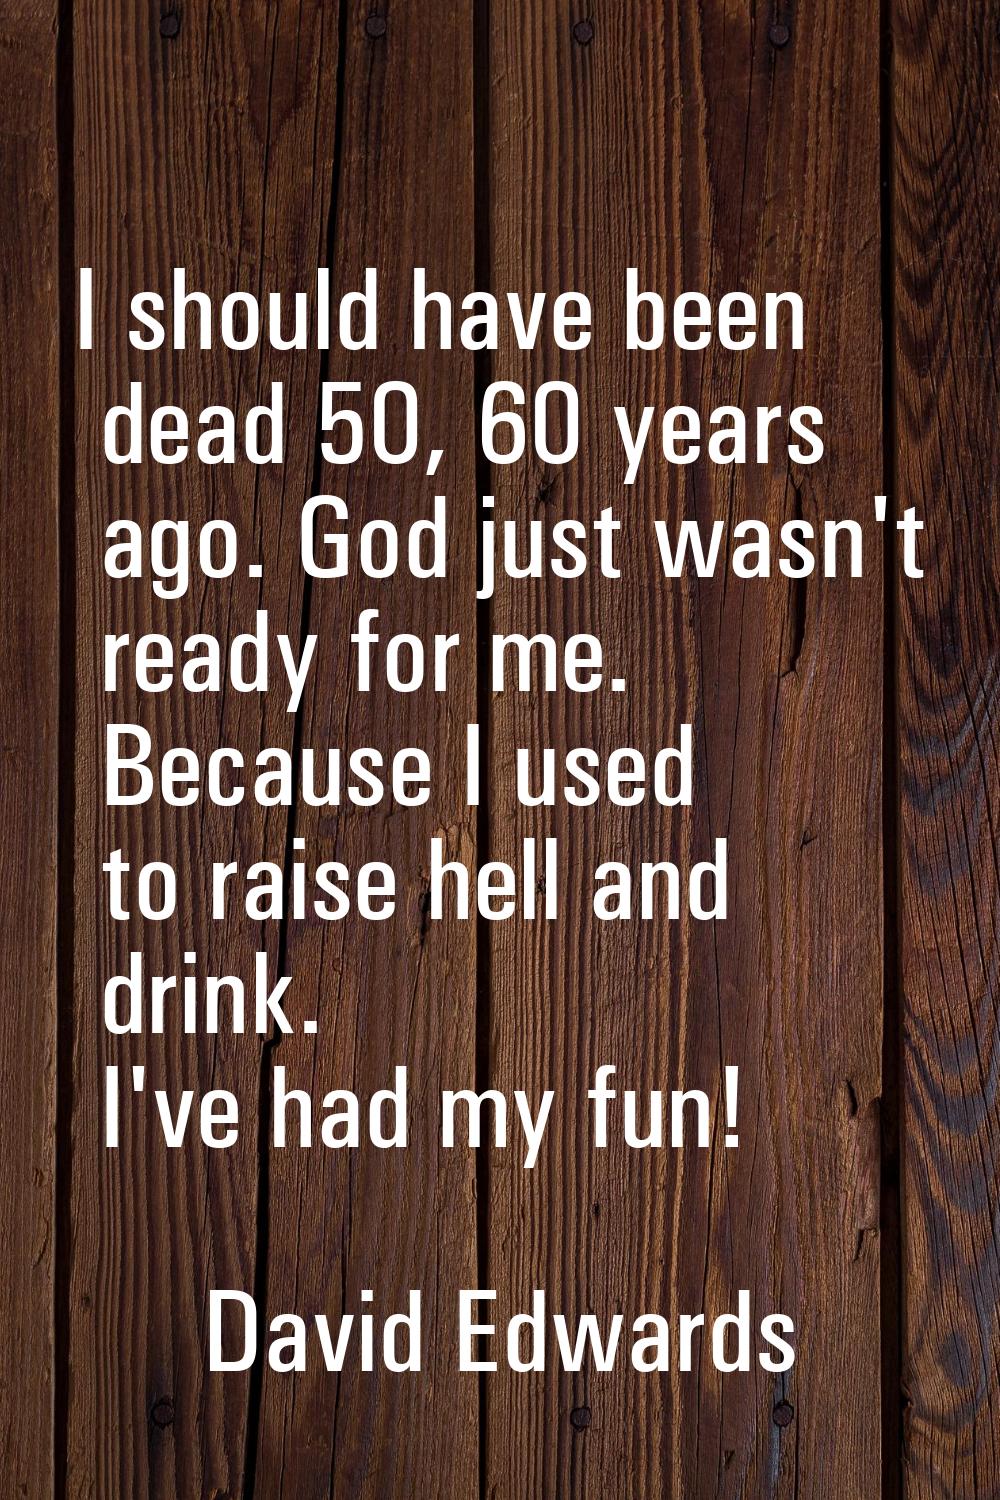 I should have been dead 50, 60 years ago. God just wasn't ready for me. Because I used to raise hel